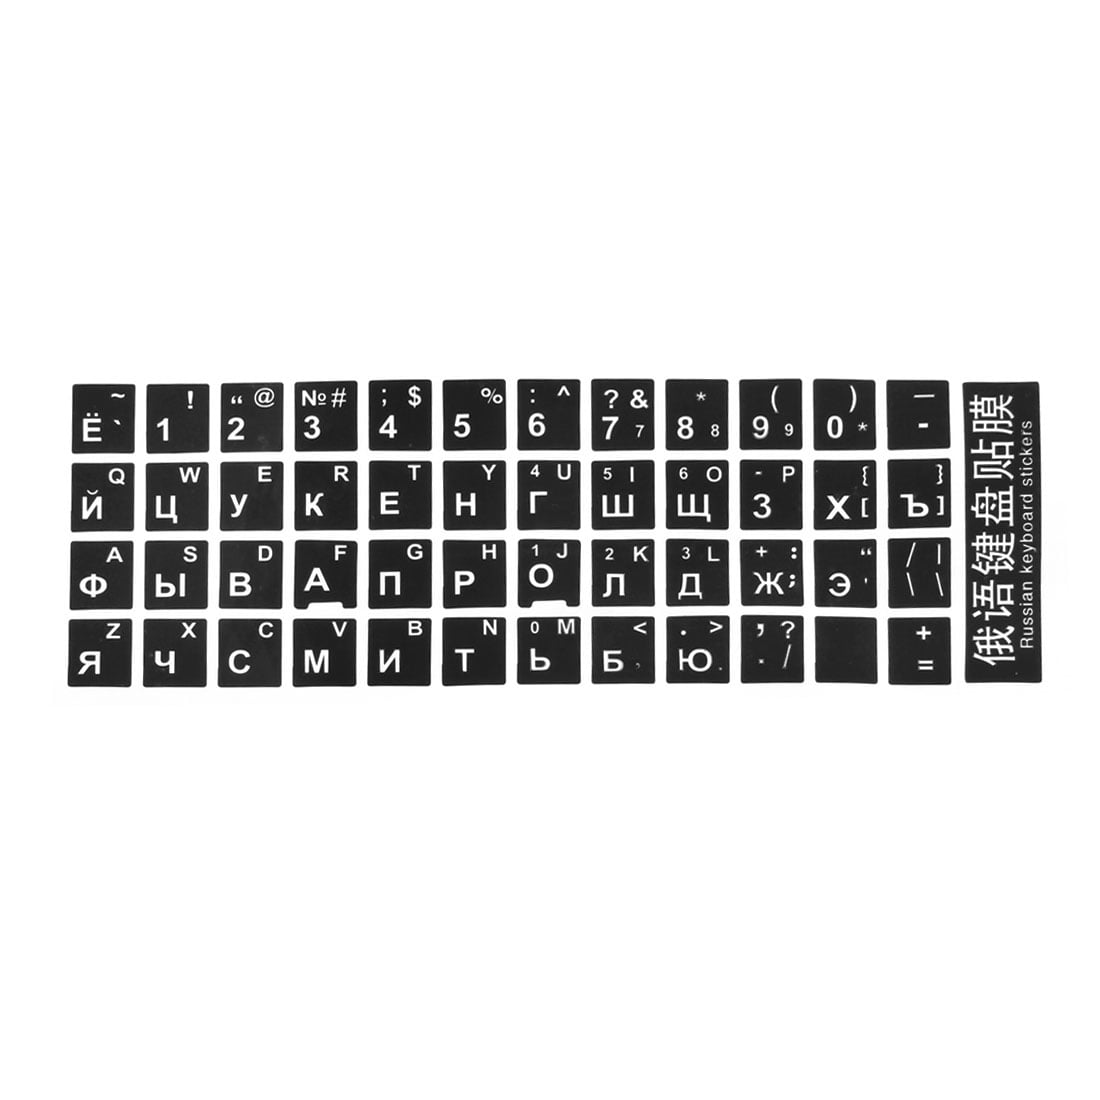 Arabic Black Keyboard Stickers for ALL PC Laptop new